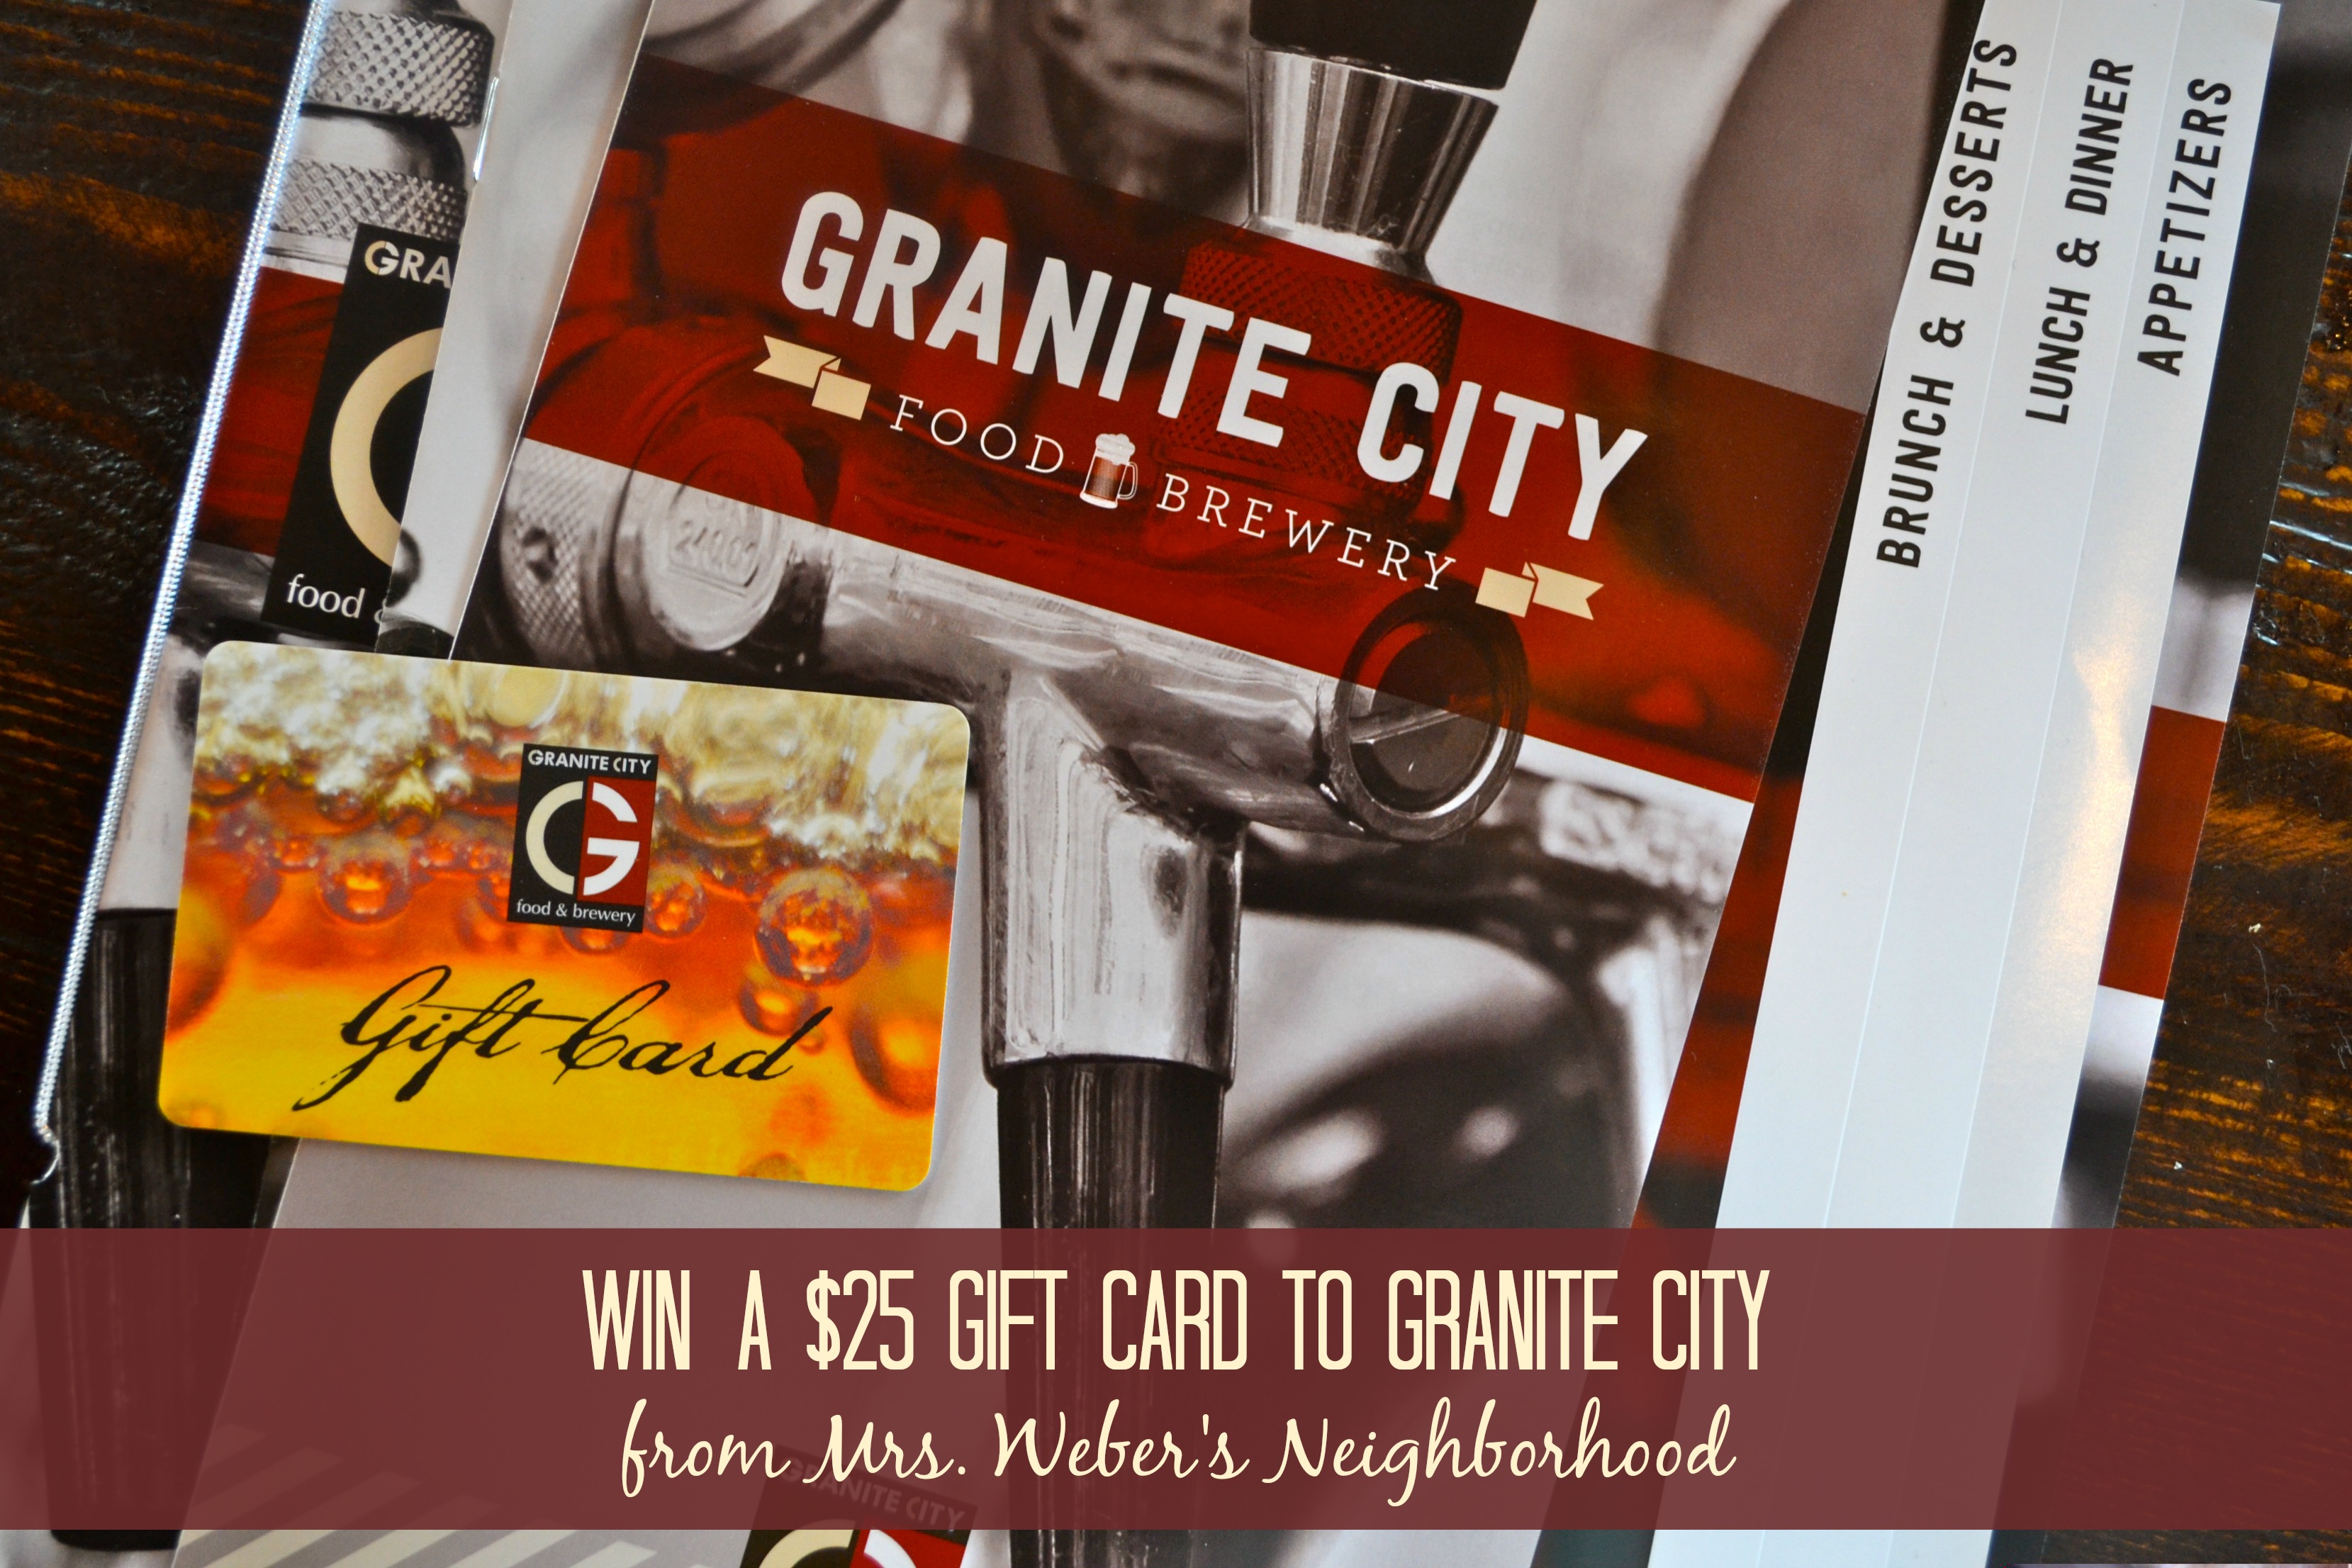 11 Reasons To Visit Granite City Northville {+ $25 Gift Card Giveaway